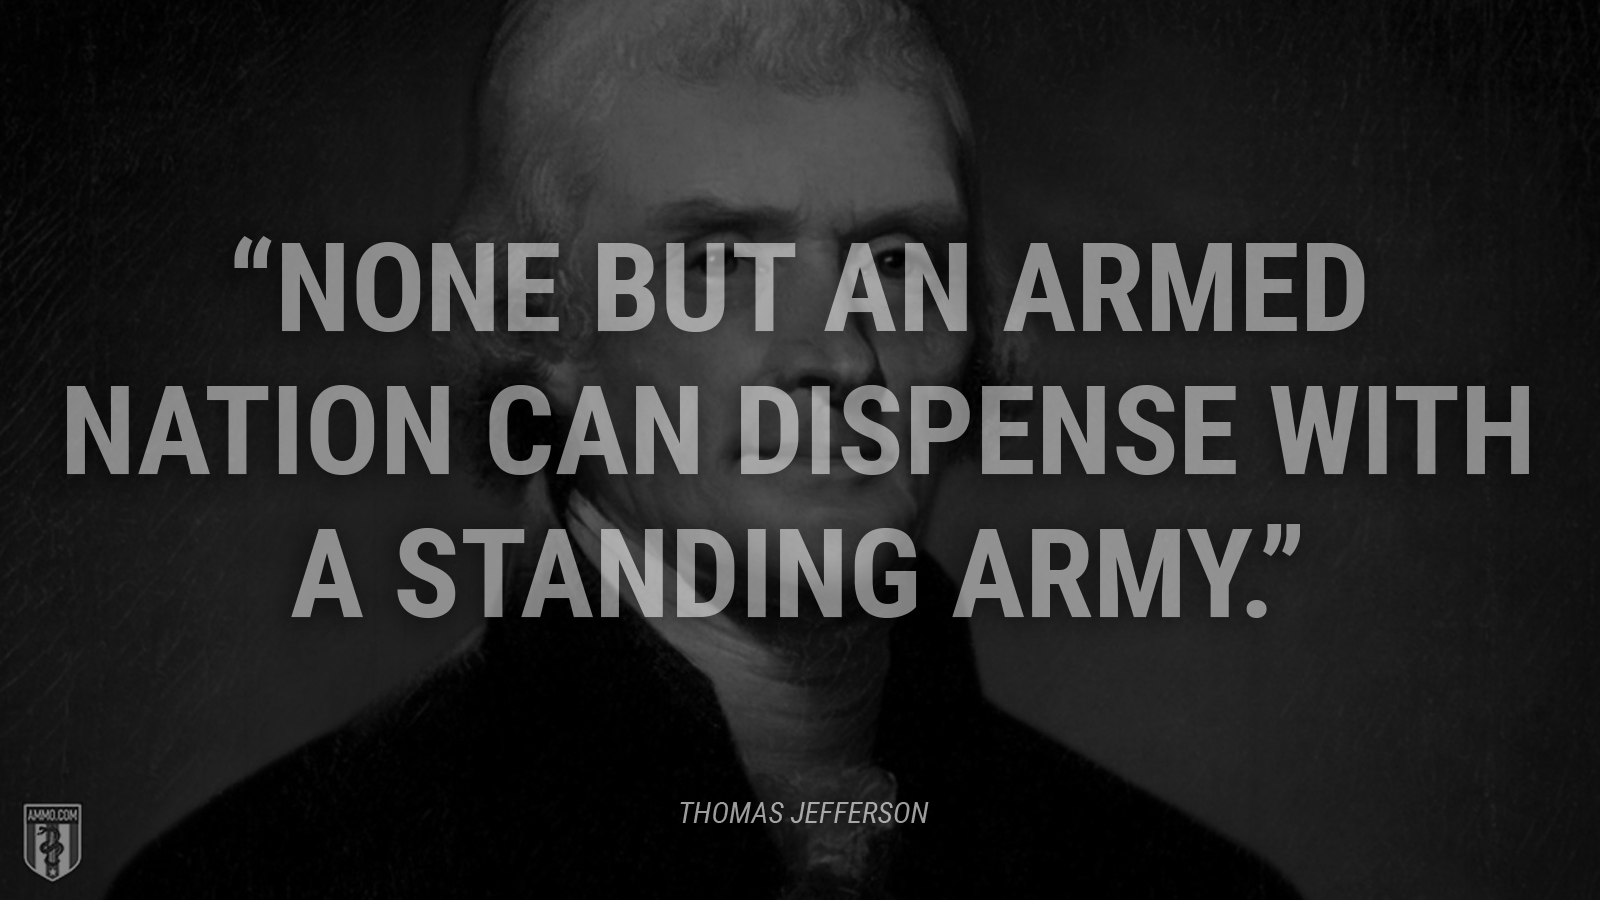 “None but an armed nation can dispense with a standing army.” - Thomas Jefferson